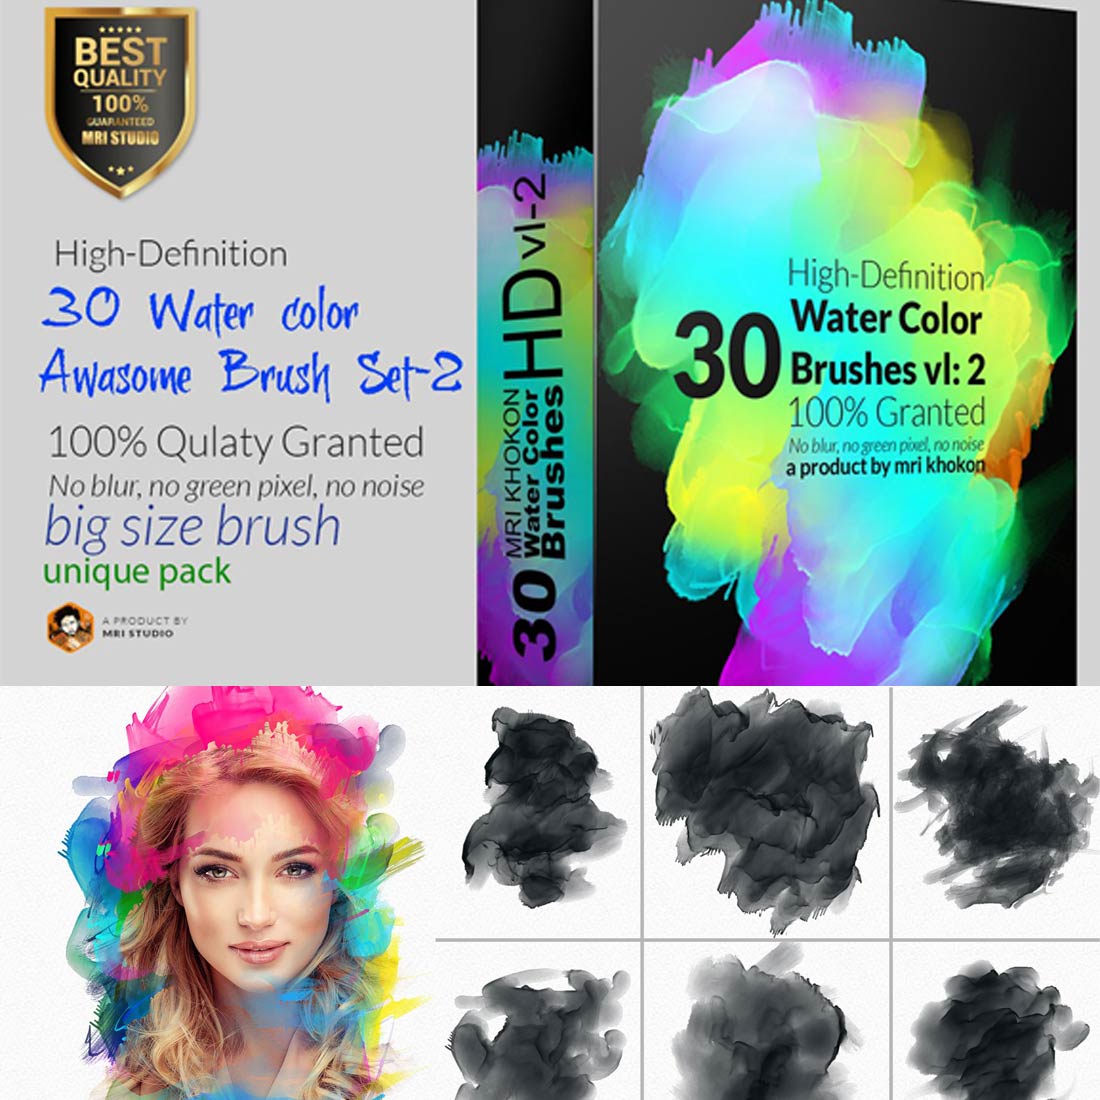 Hi-Res Water color PS Brush Set-2 cover image.